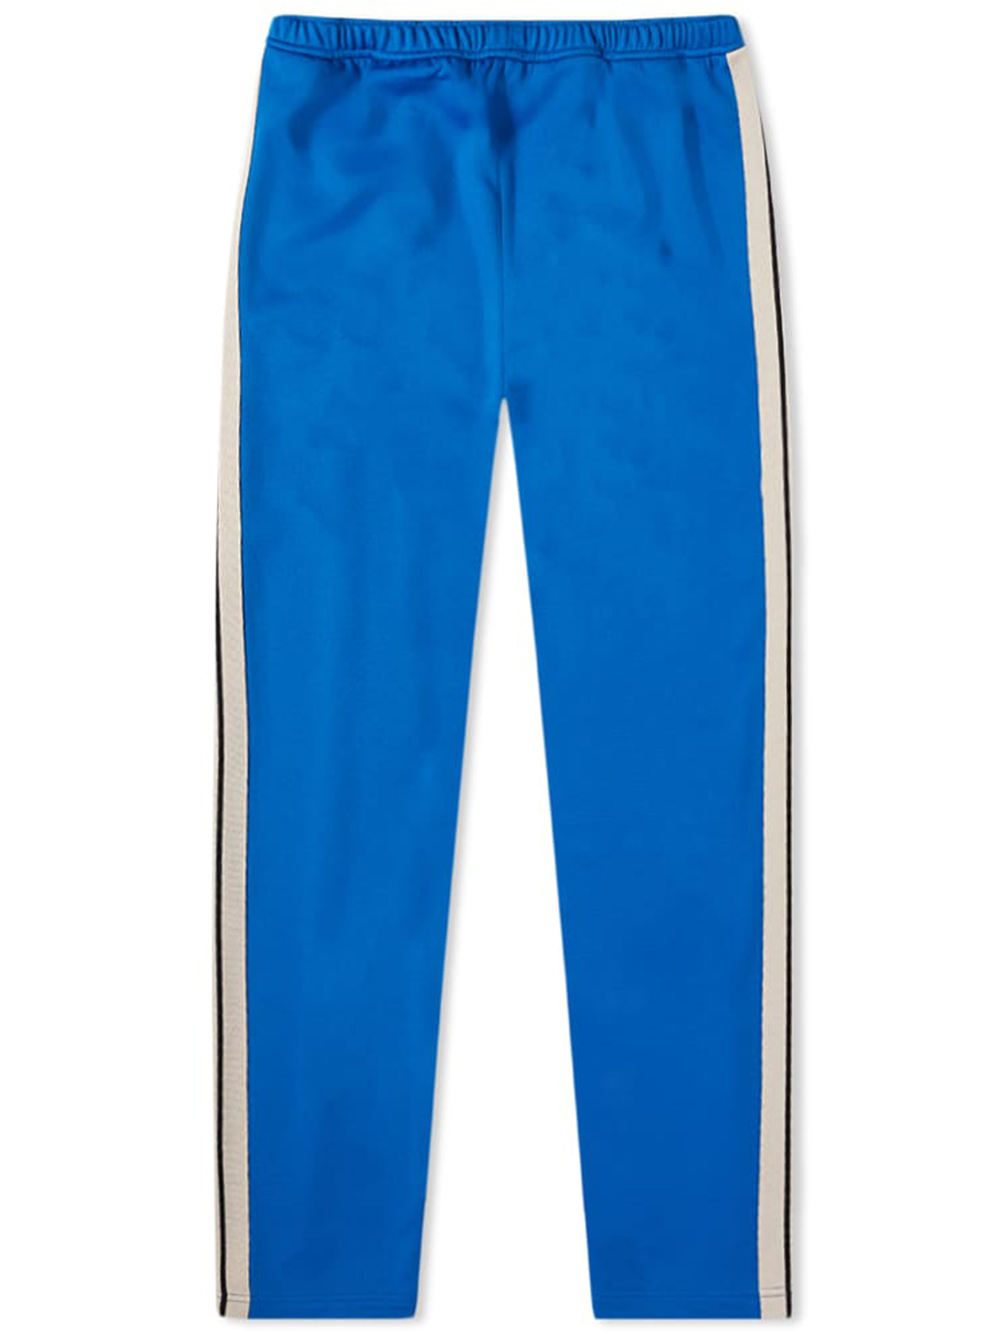 Navy Blue Cotton Track Pant White Stripes at Rs 430/set | Sports Lower in  Mumbai | ID: 13877806697